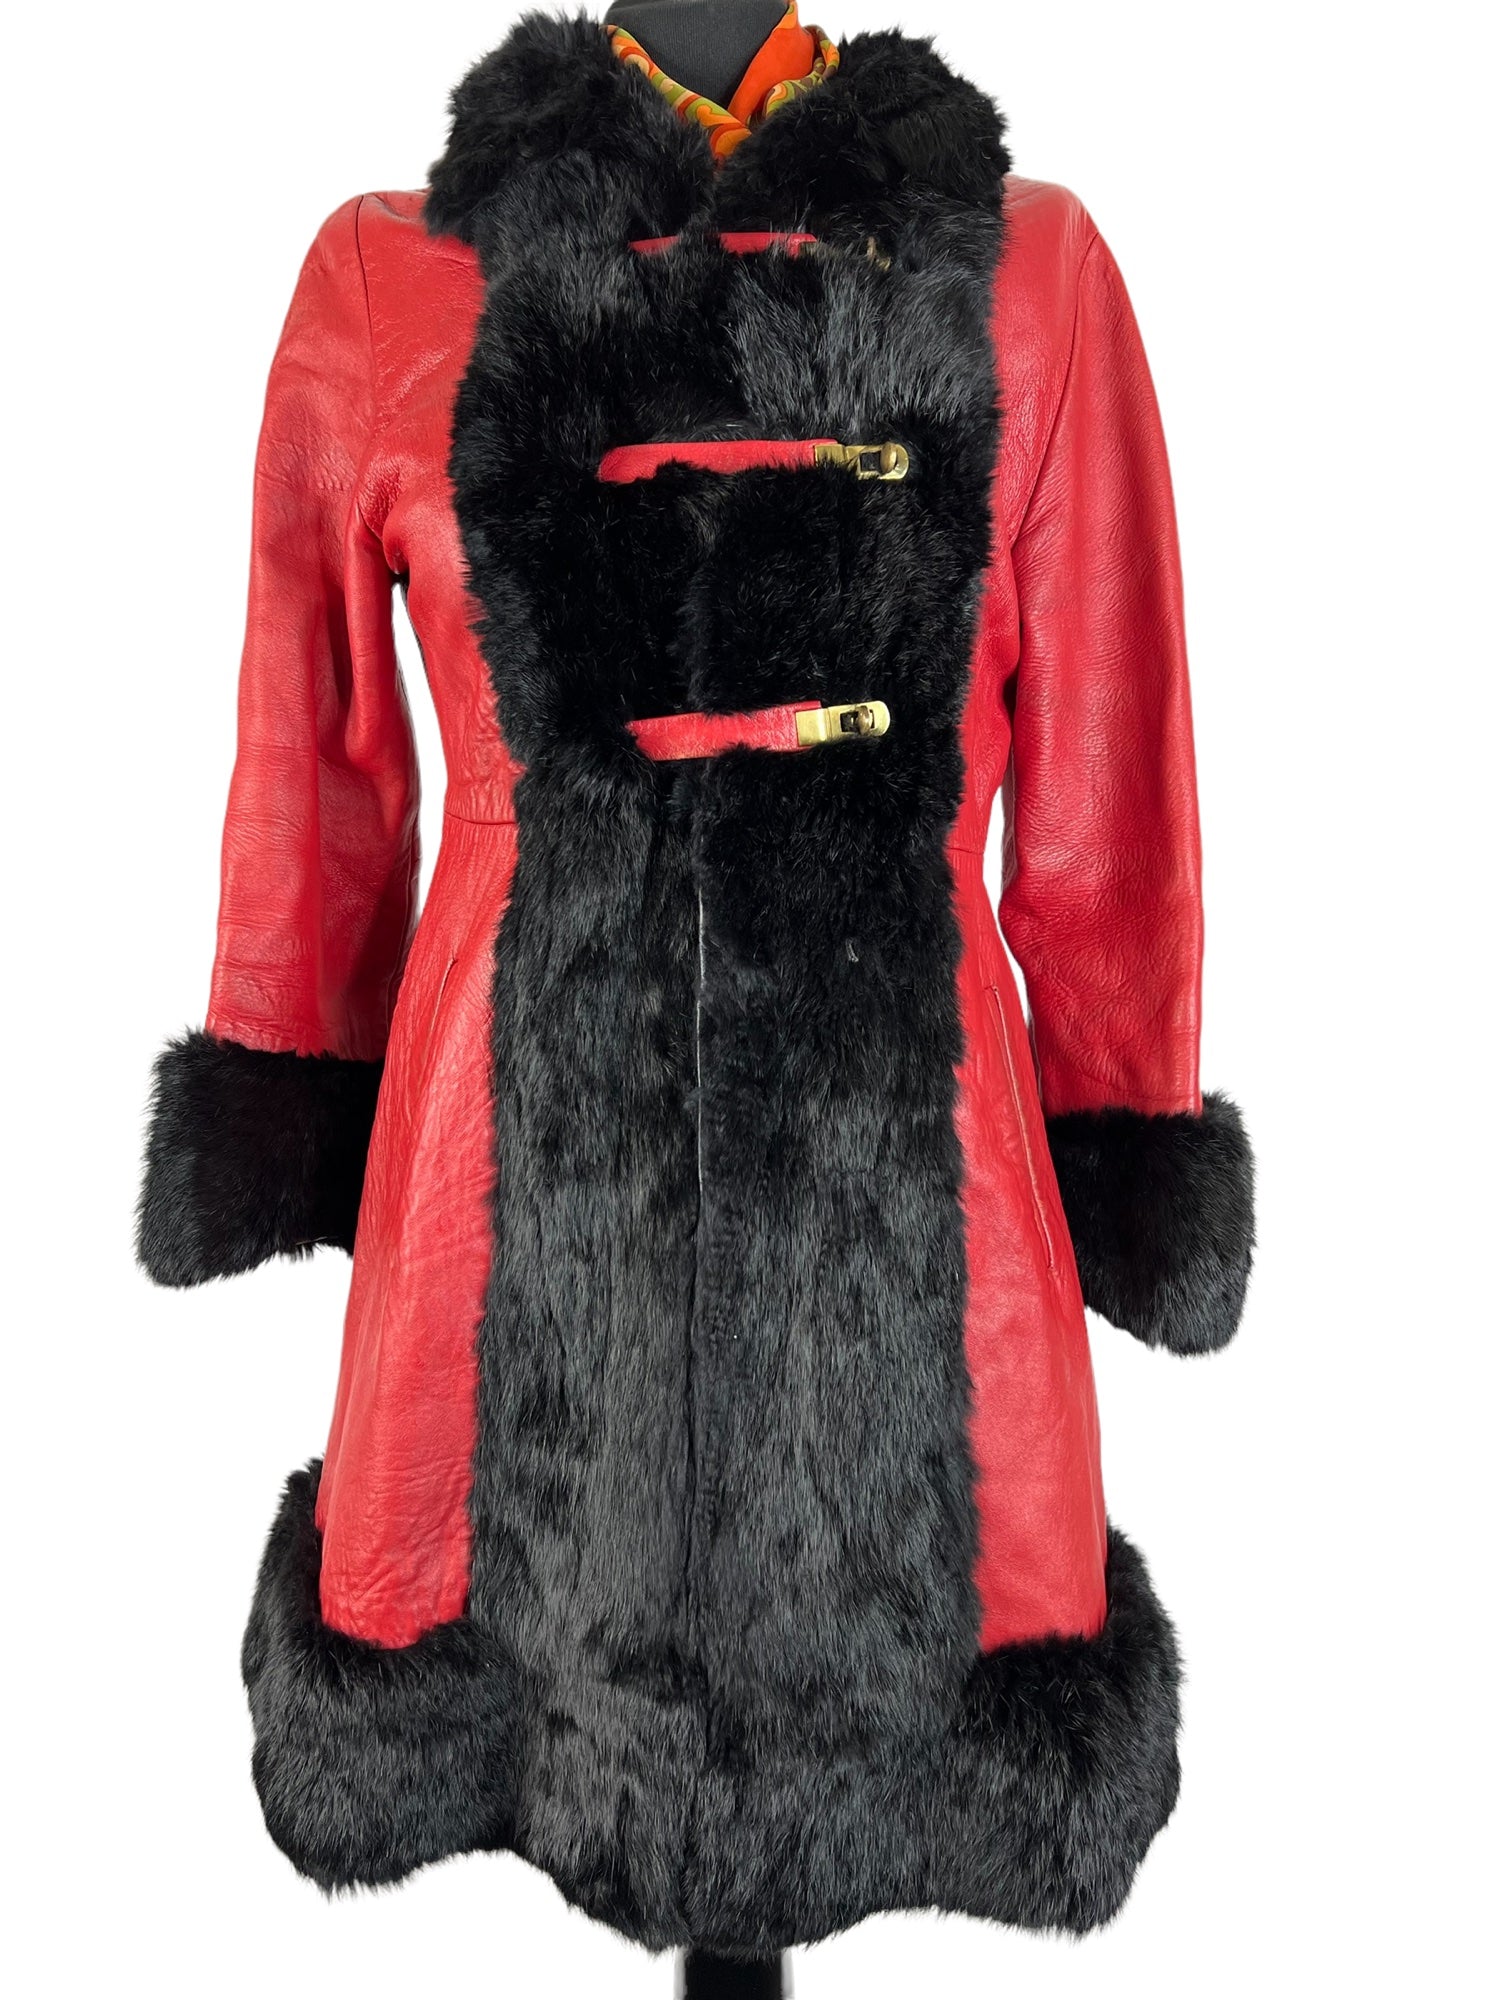 womens  winter warmer  Winter Coat  winter  vintage fur  vintage  UK  twist lock  style  red leather  red  real fur  long coat  Leather Coat  Leather  ladies  fur trims  festive  fashion  Coney Fur  coat  clothing  clothes  christmassy  christmas  black coney fur  autumnal  autumn  70s  1970s  10